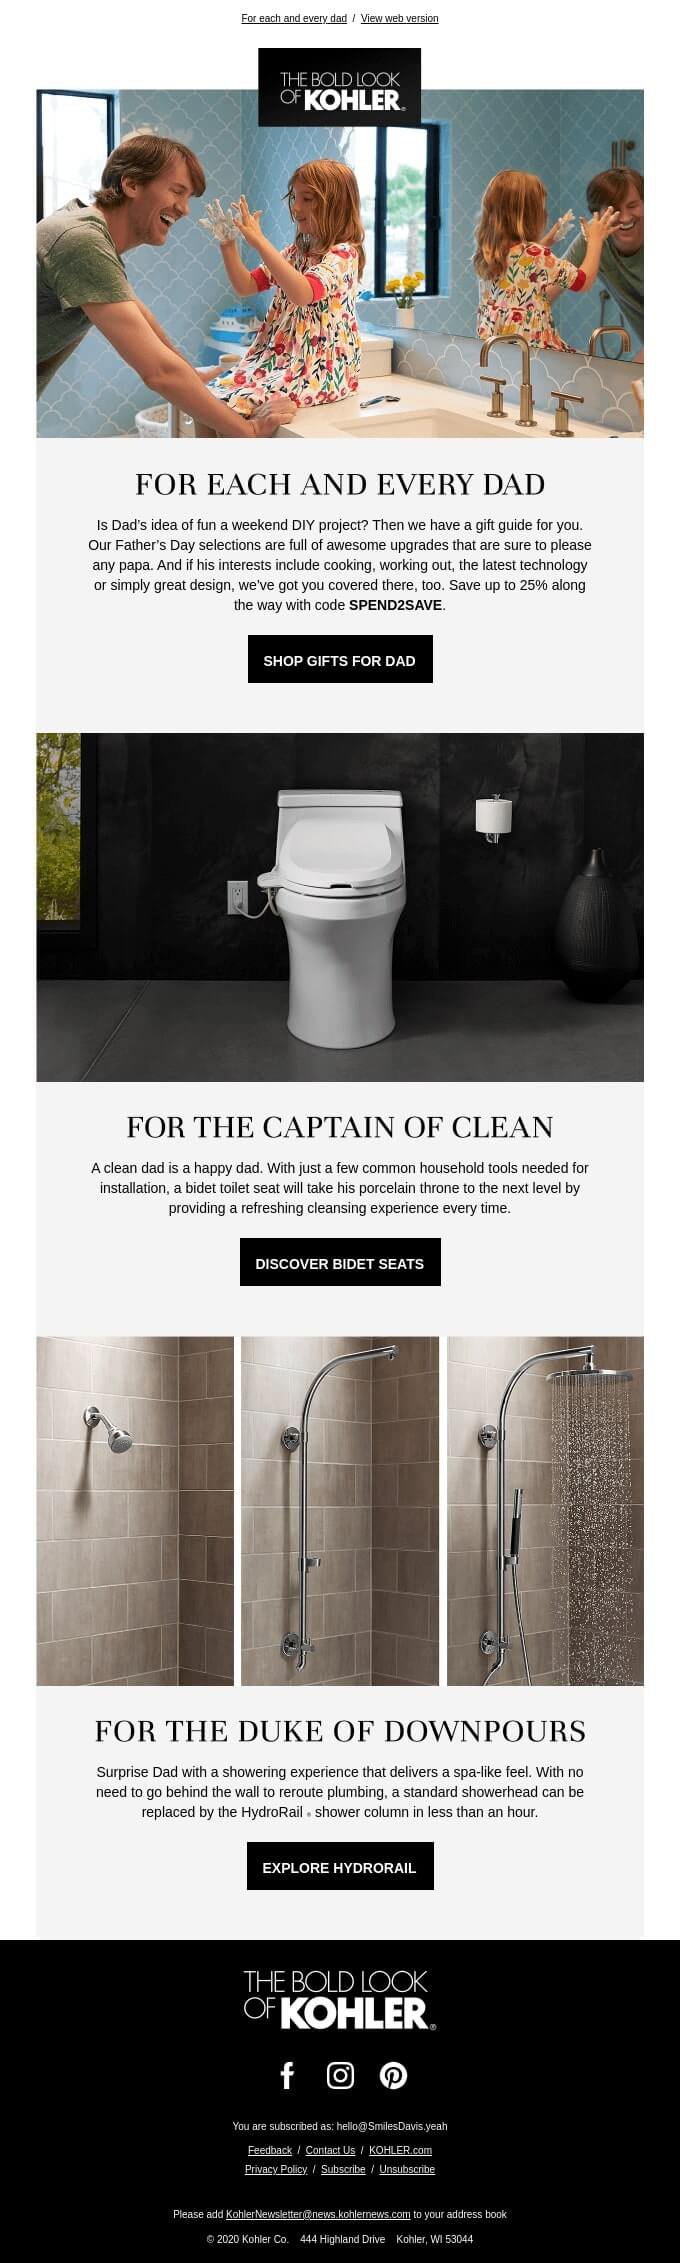 kohler-fathers-day-email